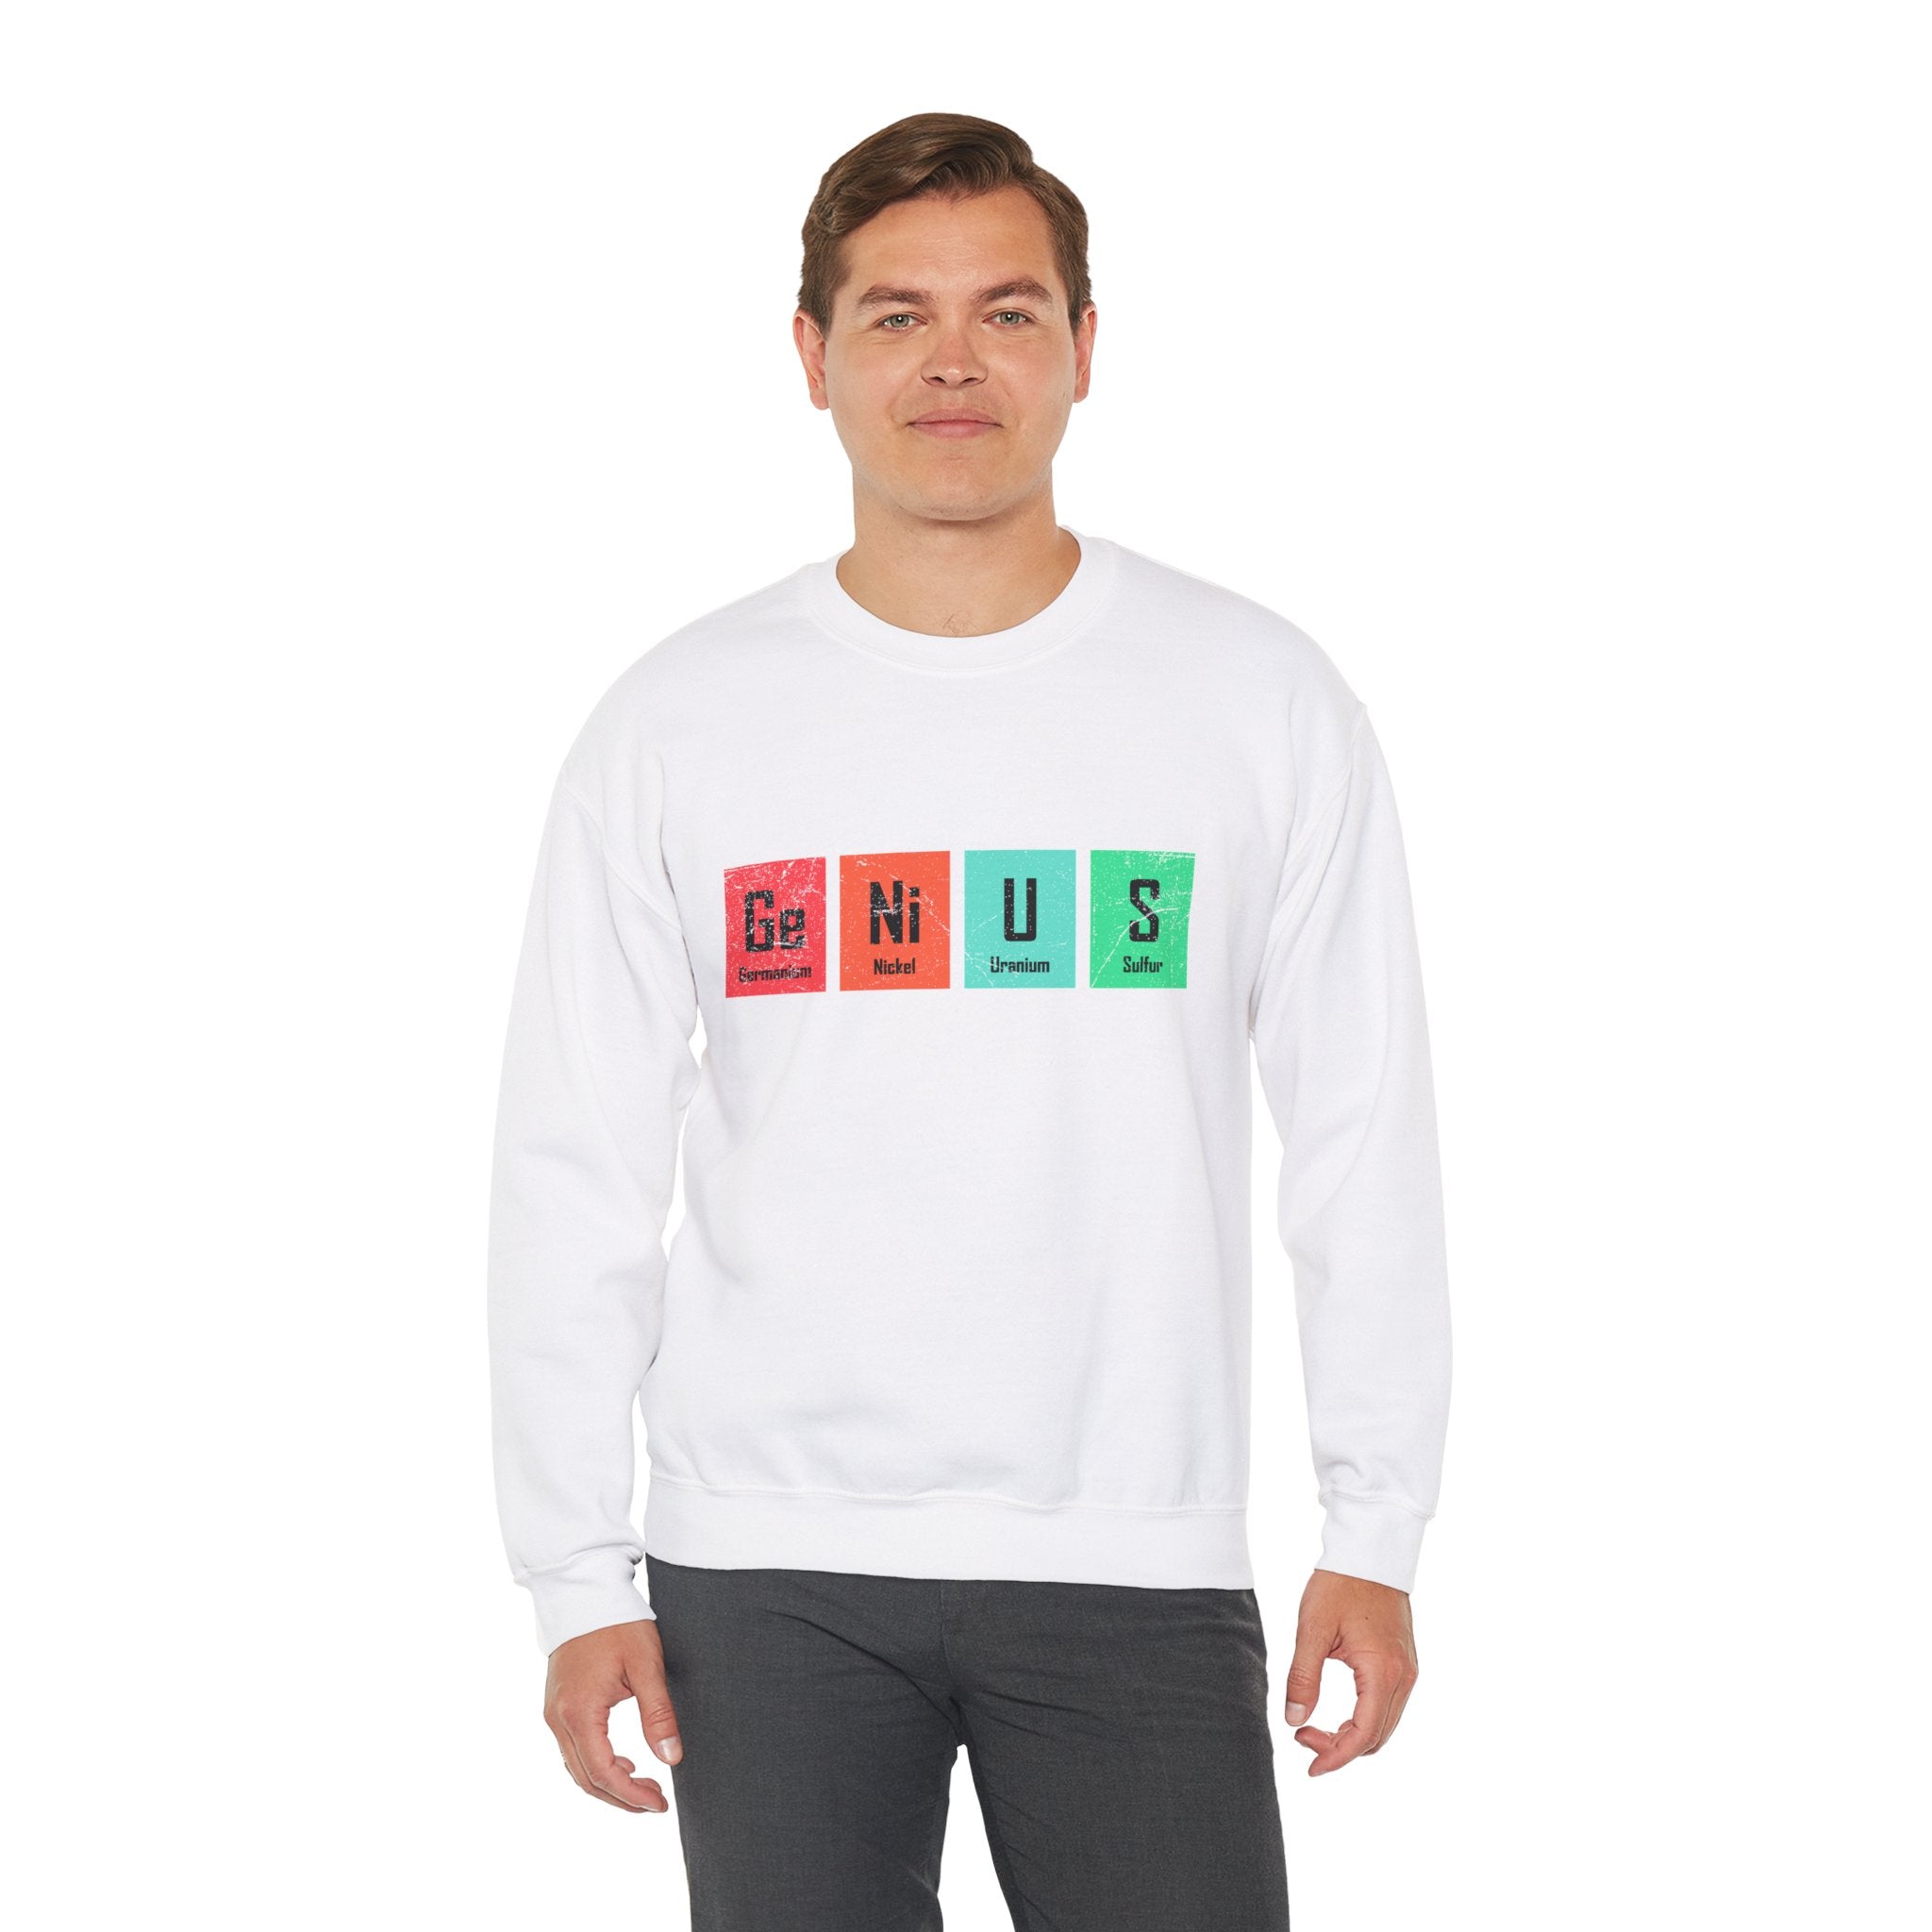 A man wearing a comfortable white Ge-Ni-U-S - Sweatshirt with blocks featuring elements from the periodic table spelling "Genius" stands against a plain white background, exuding an air of both intellect and warmth.